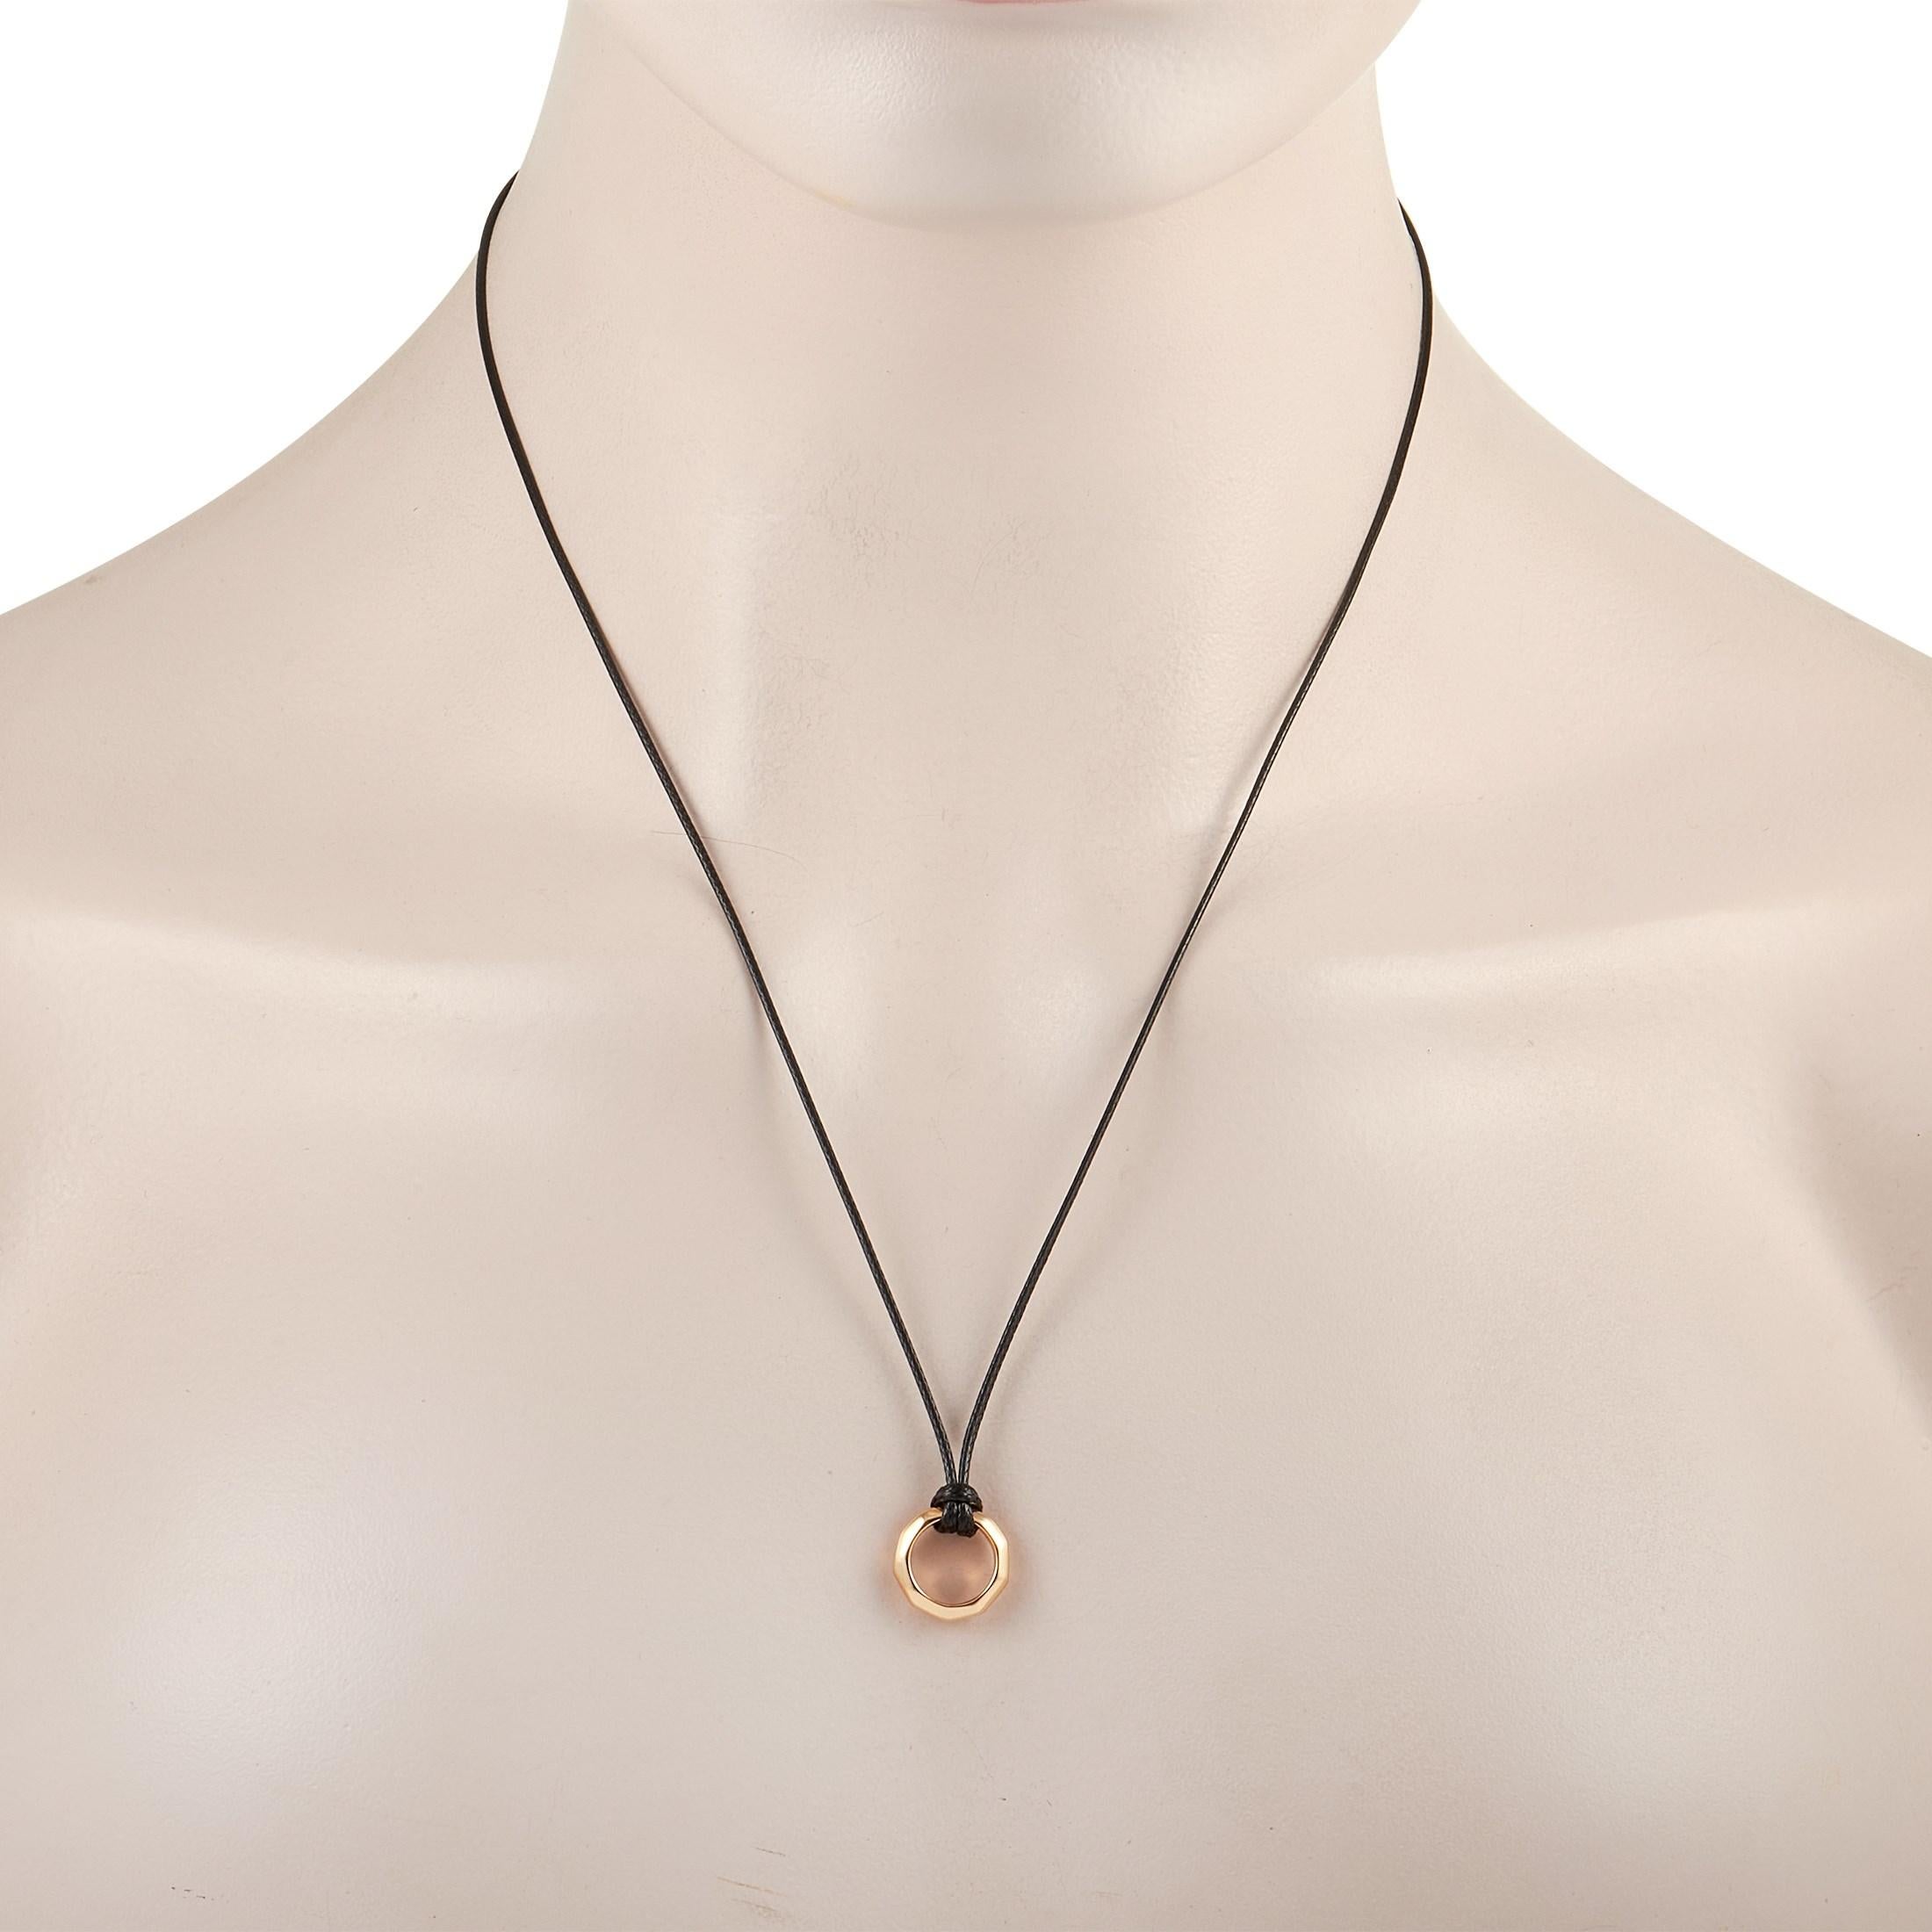 This simple Pomellato Milano 18K Rose Gold Circle Pendant Necklace is full of modern flair. The necklace is made with a black cord measuring 24 inches and features a hollow circle pendant made from 18K rose gold and shaped into a soft octogon. The